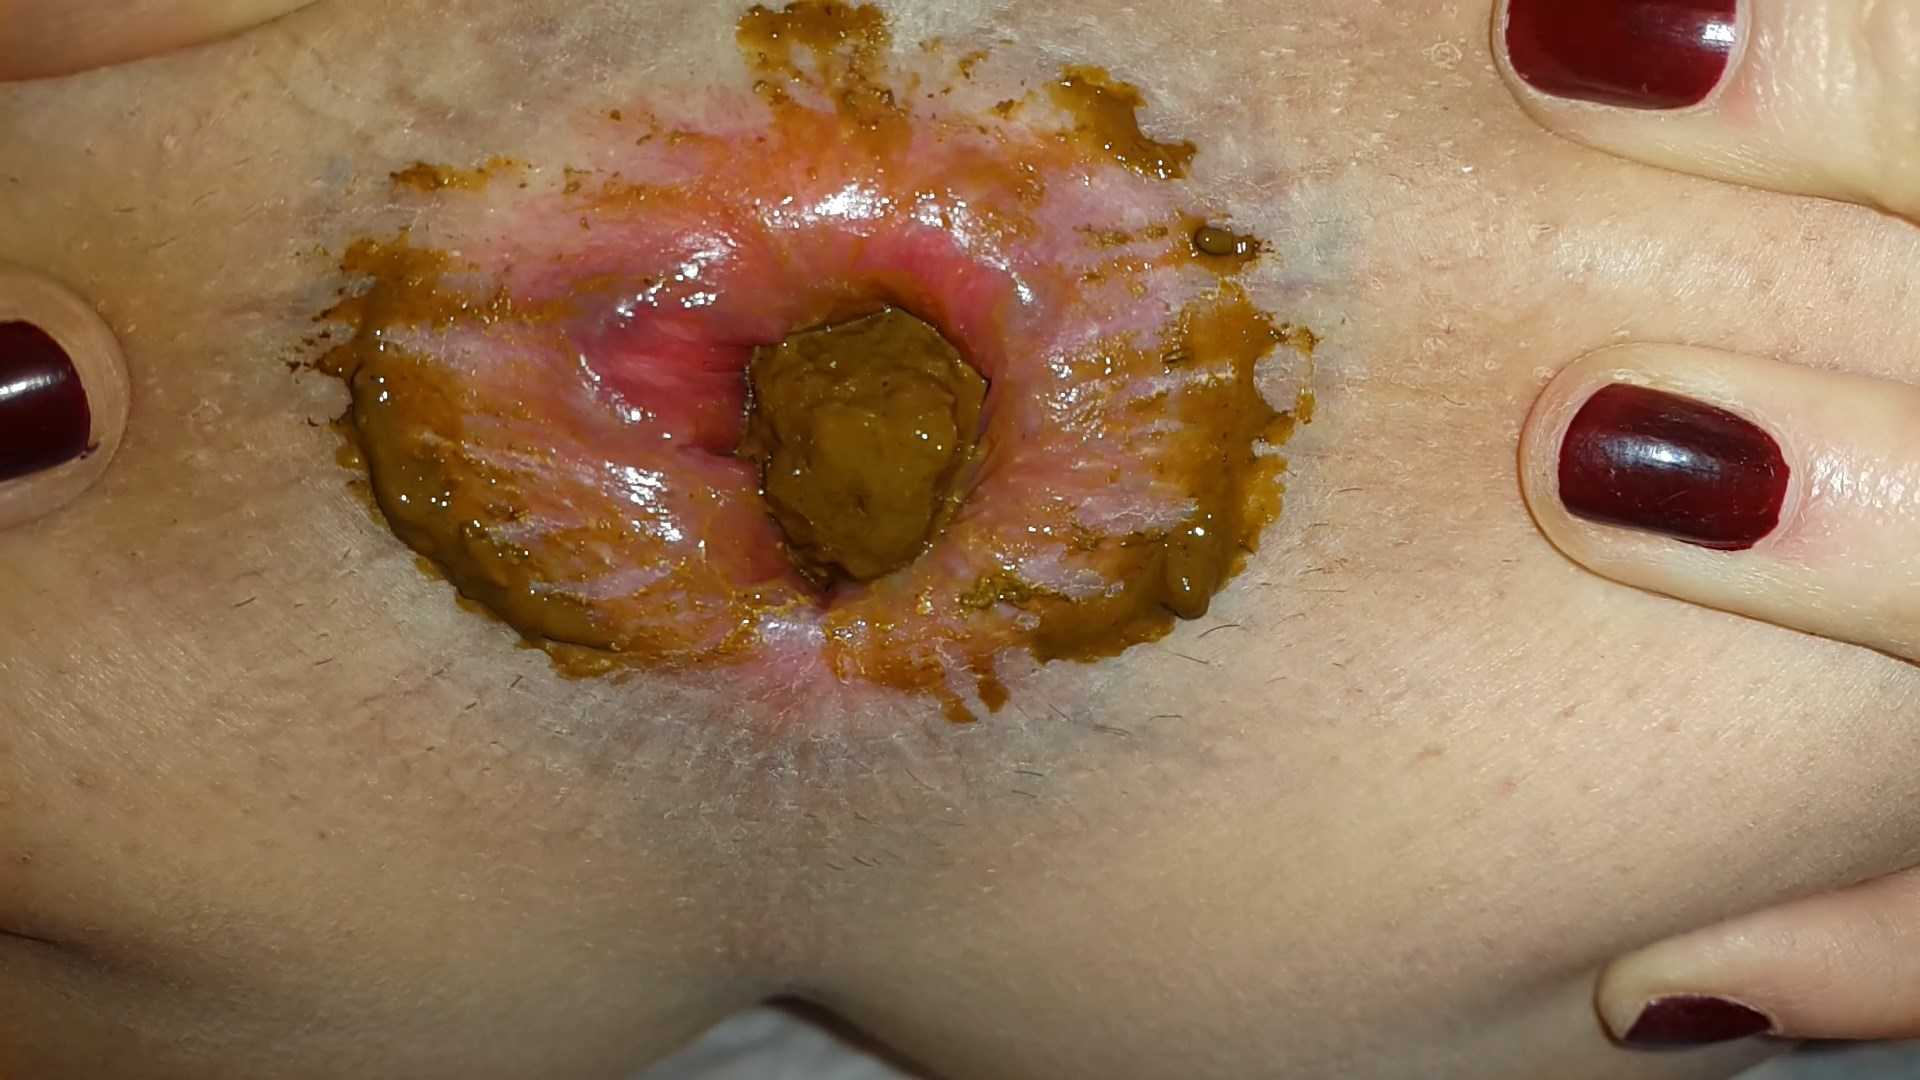 Quickly shit in the morning and the beginning of menstruation - Anna Coprofield | Full HD 1080p | April 14, 2017 